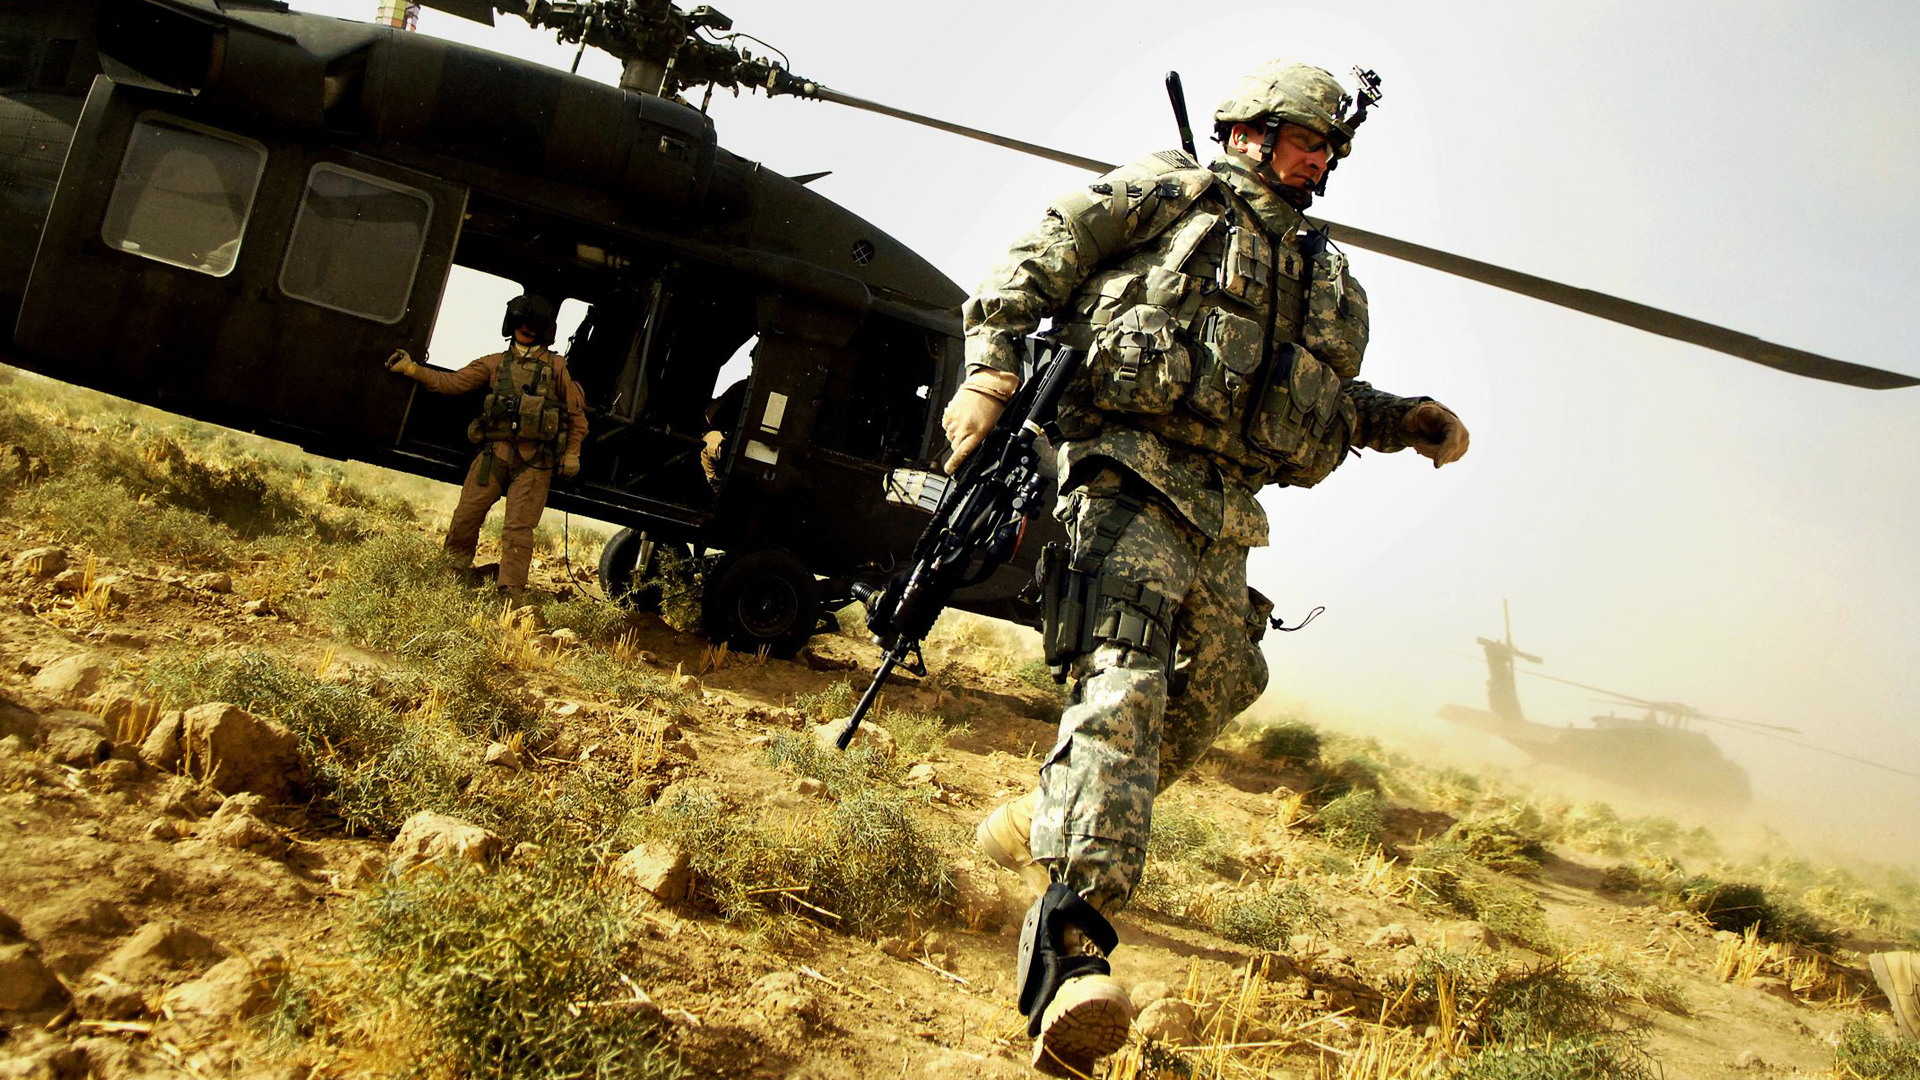 soldiers, army, military, helicopters, vehicles - desktop wallpaper